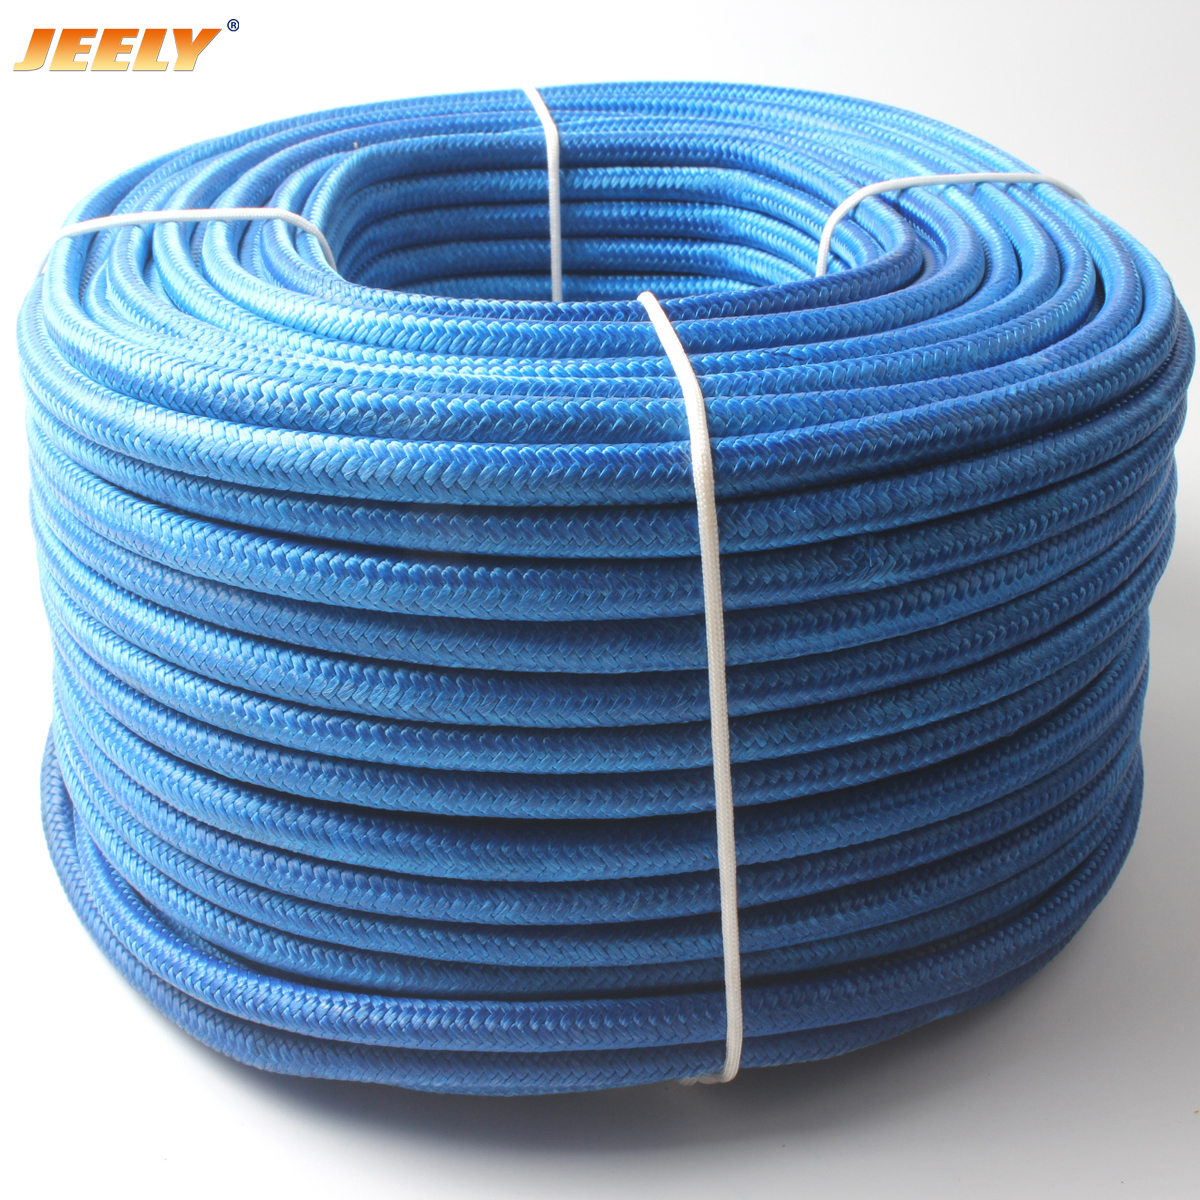 2mm-40mm Polypropylene Uhmwpe Double Braid Rope For Climbing